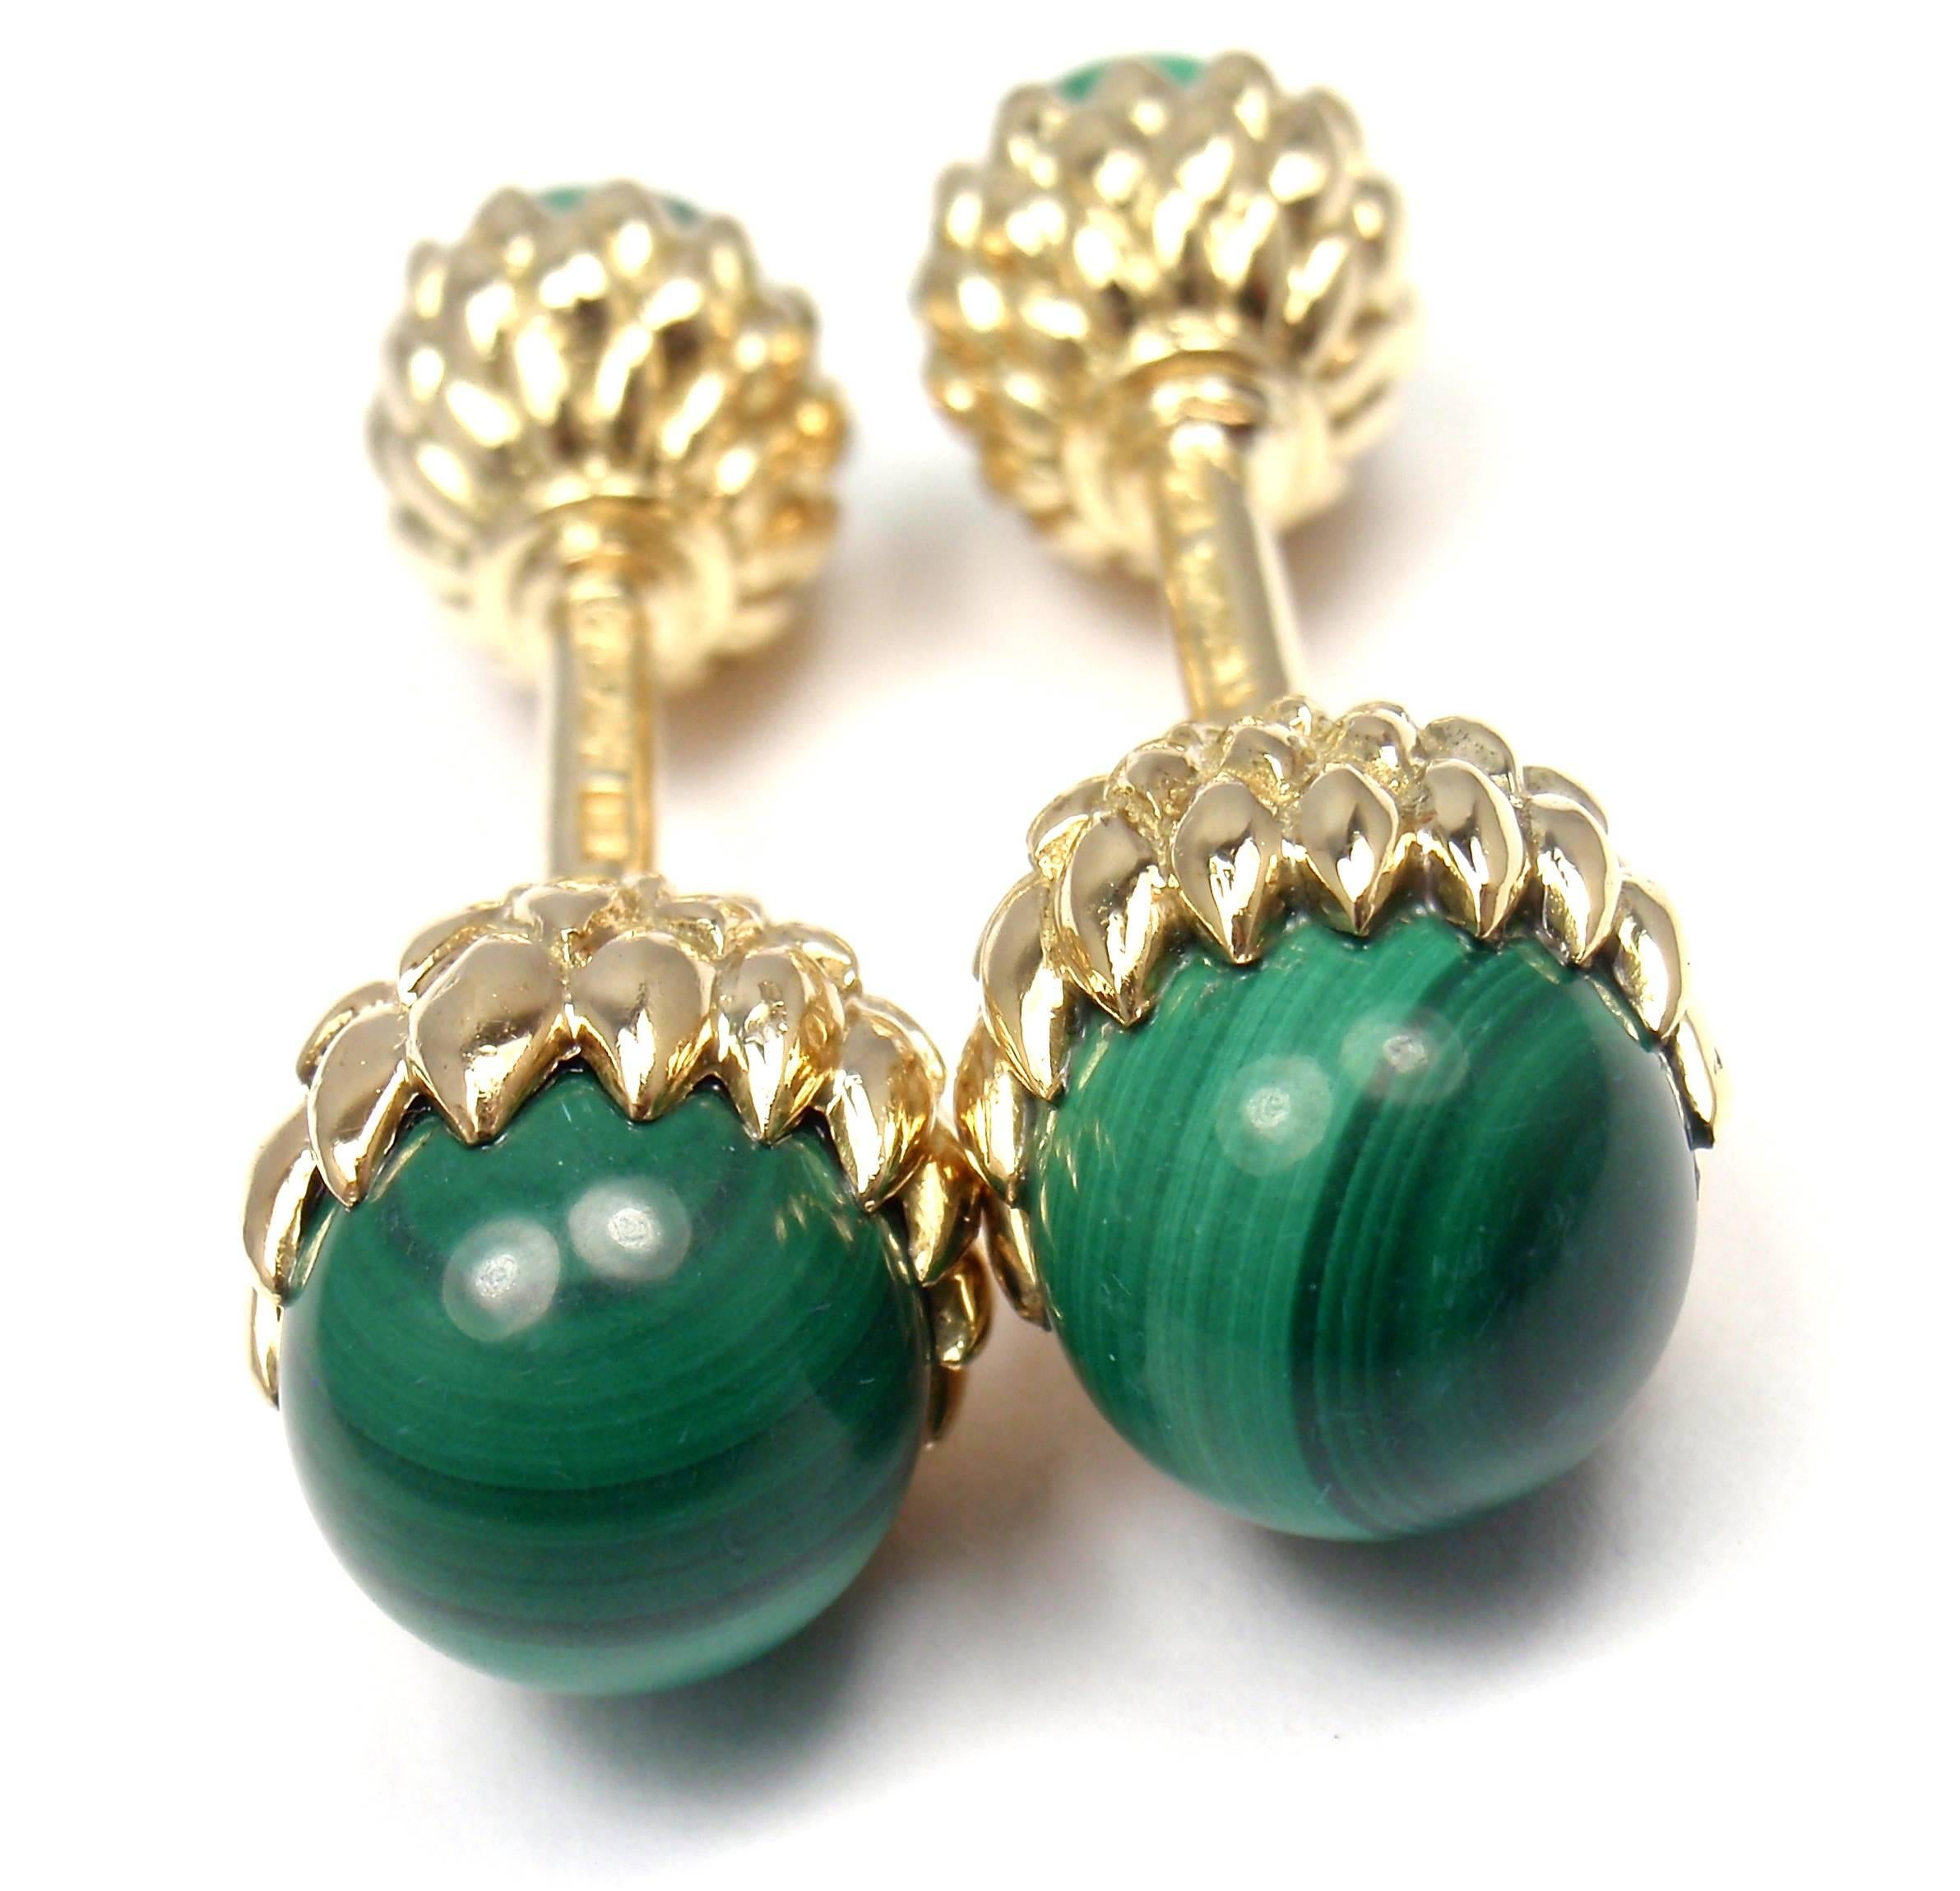 18k Yellow And Malachite Jean Schlumberger Acorn Cufflinks 
for Tiffany & Co. 
With 4 malachite stones

Details: 
Dimensions: 12mm x 9mm x 35mm
Weight: 16.1 grams
Stamped Hallmarks: Tiffany Schlumberger 18k
*Free Shipping within the United